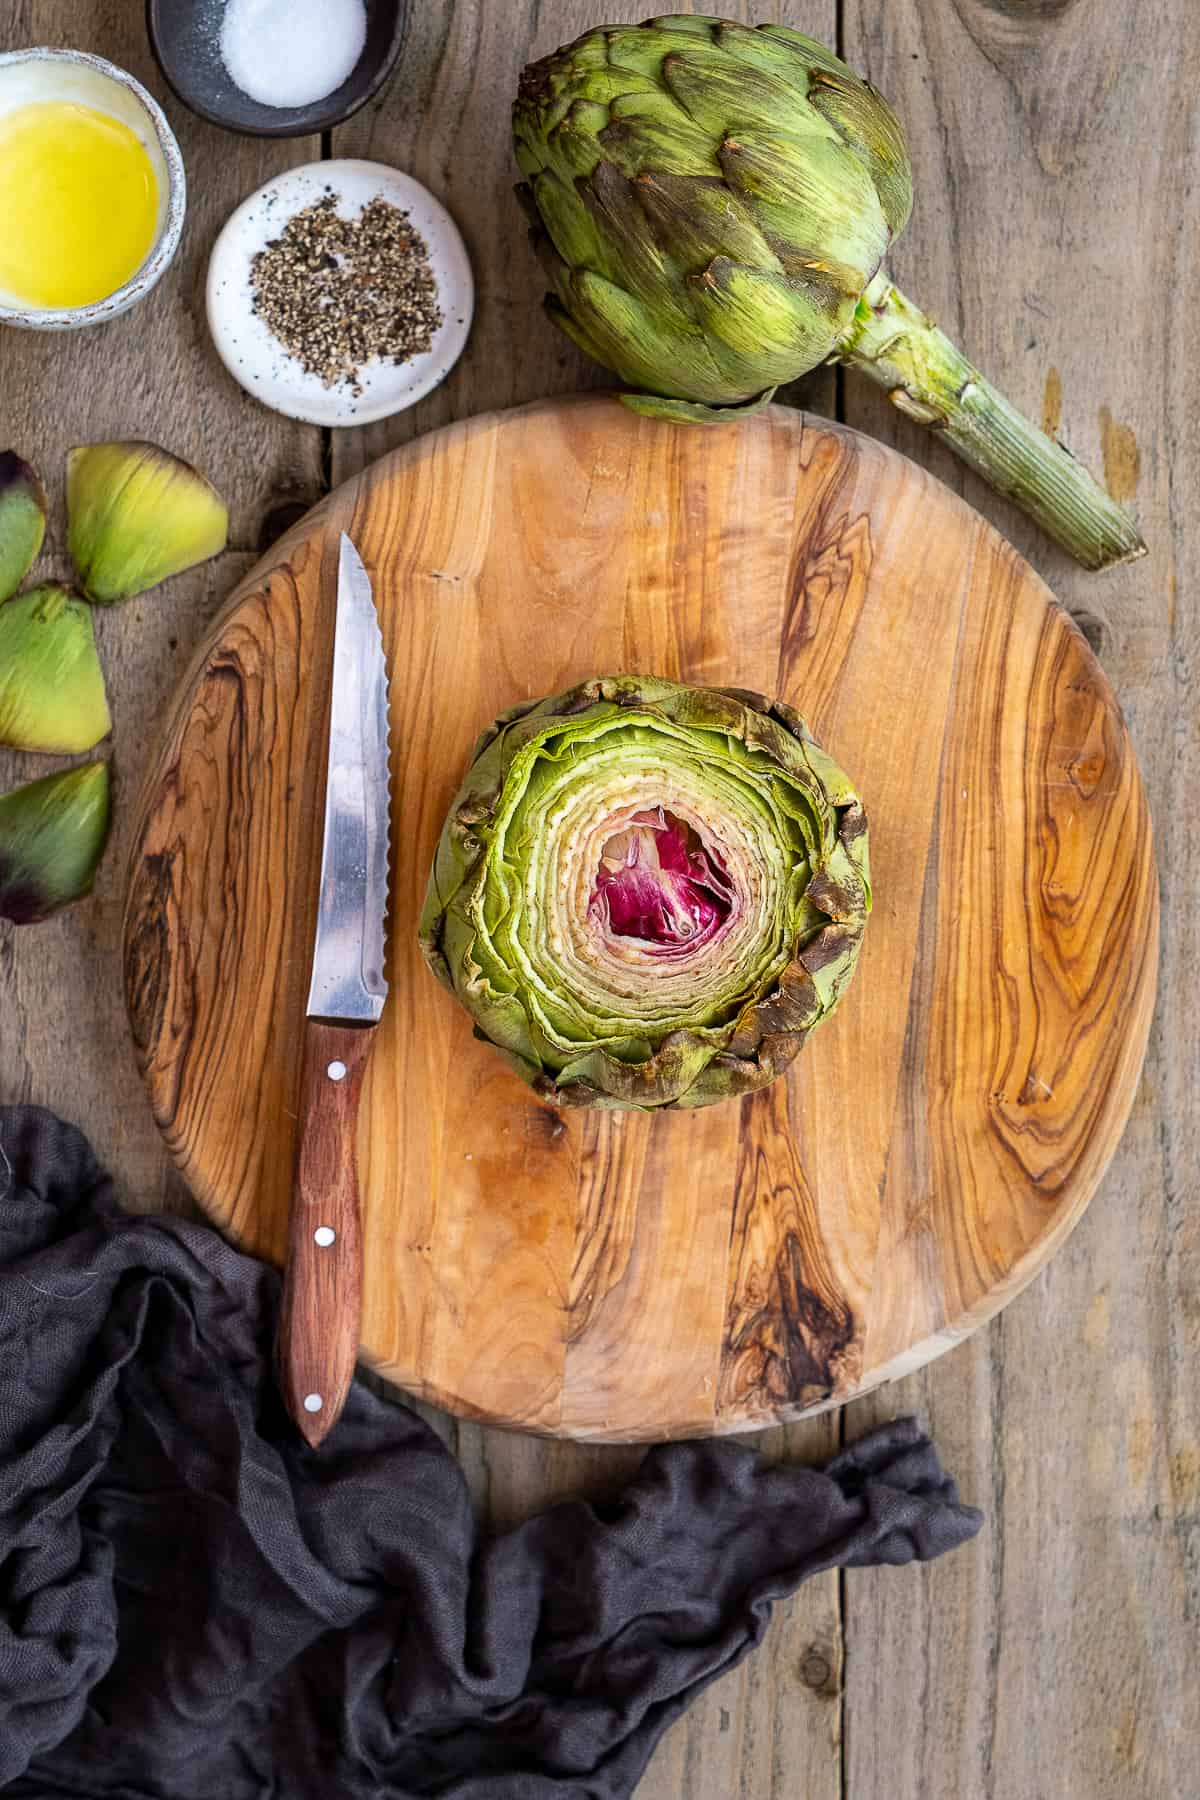 An artichoke, top part is cut off placed on a wooden board and a serrated knife on the side.